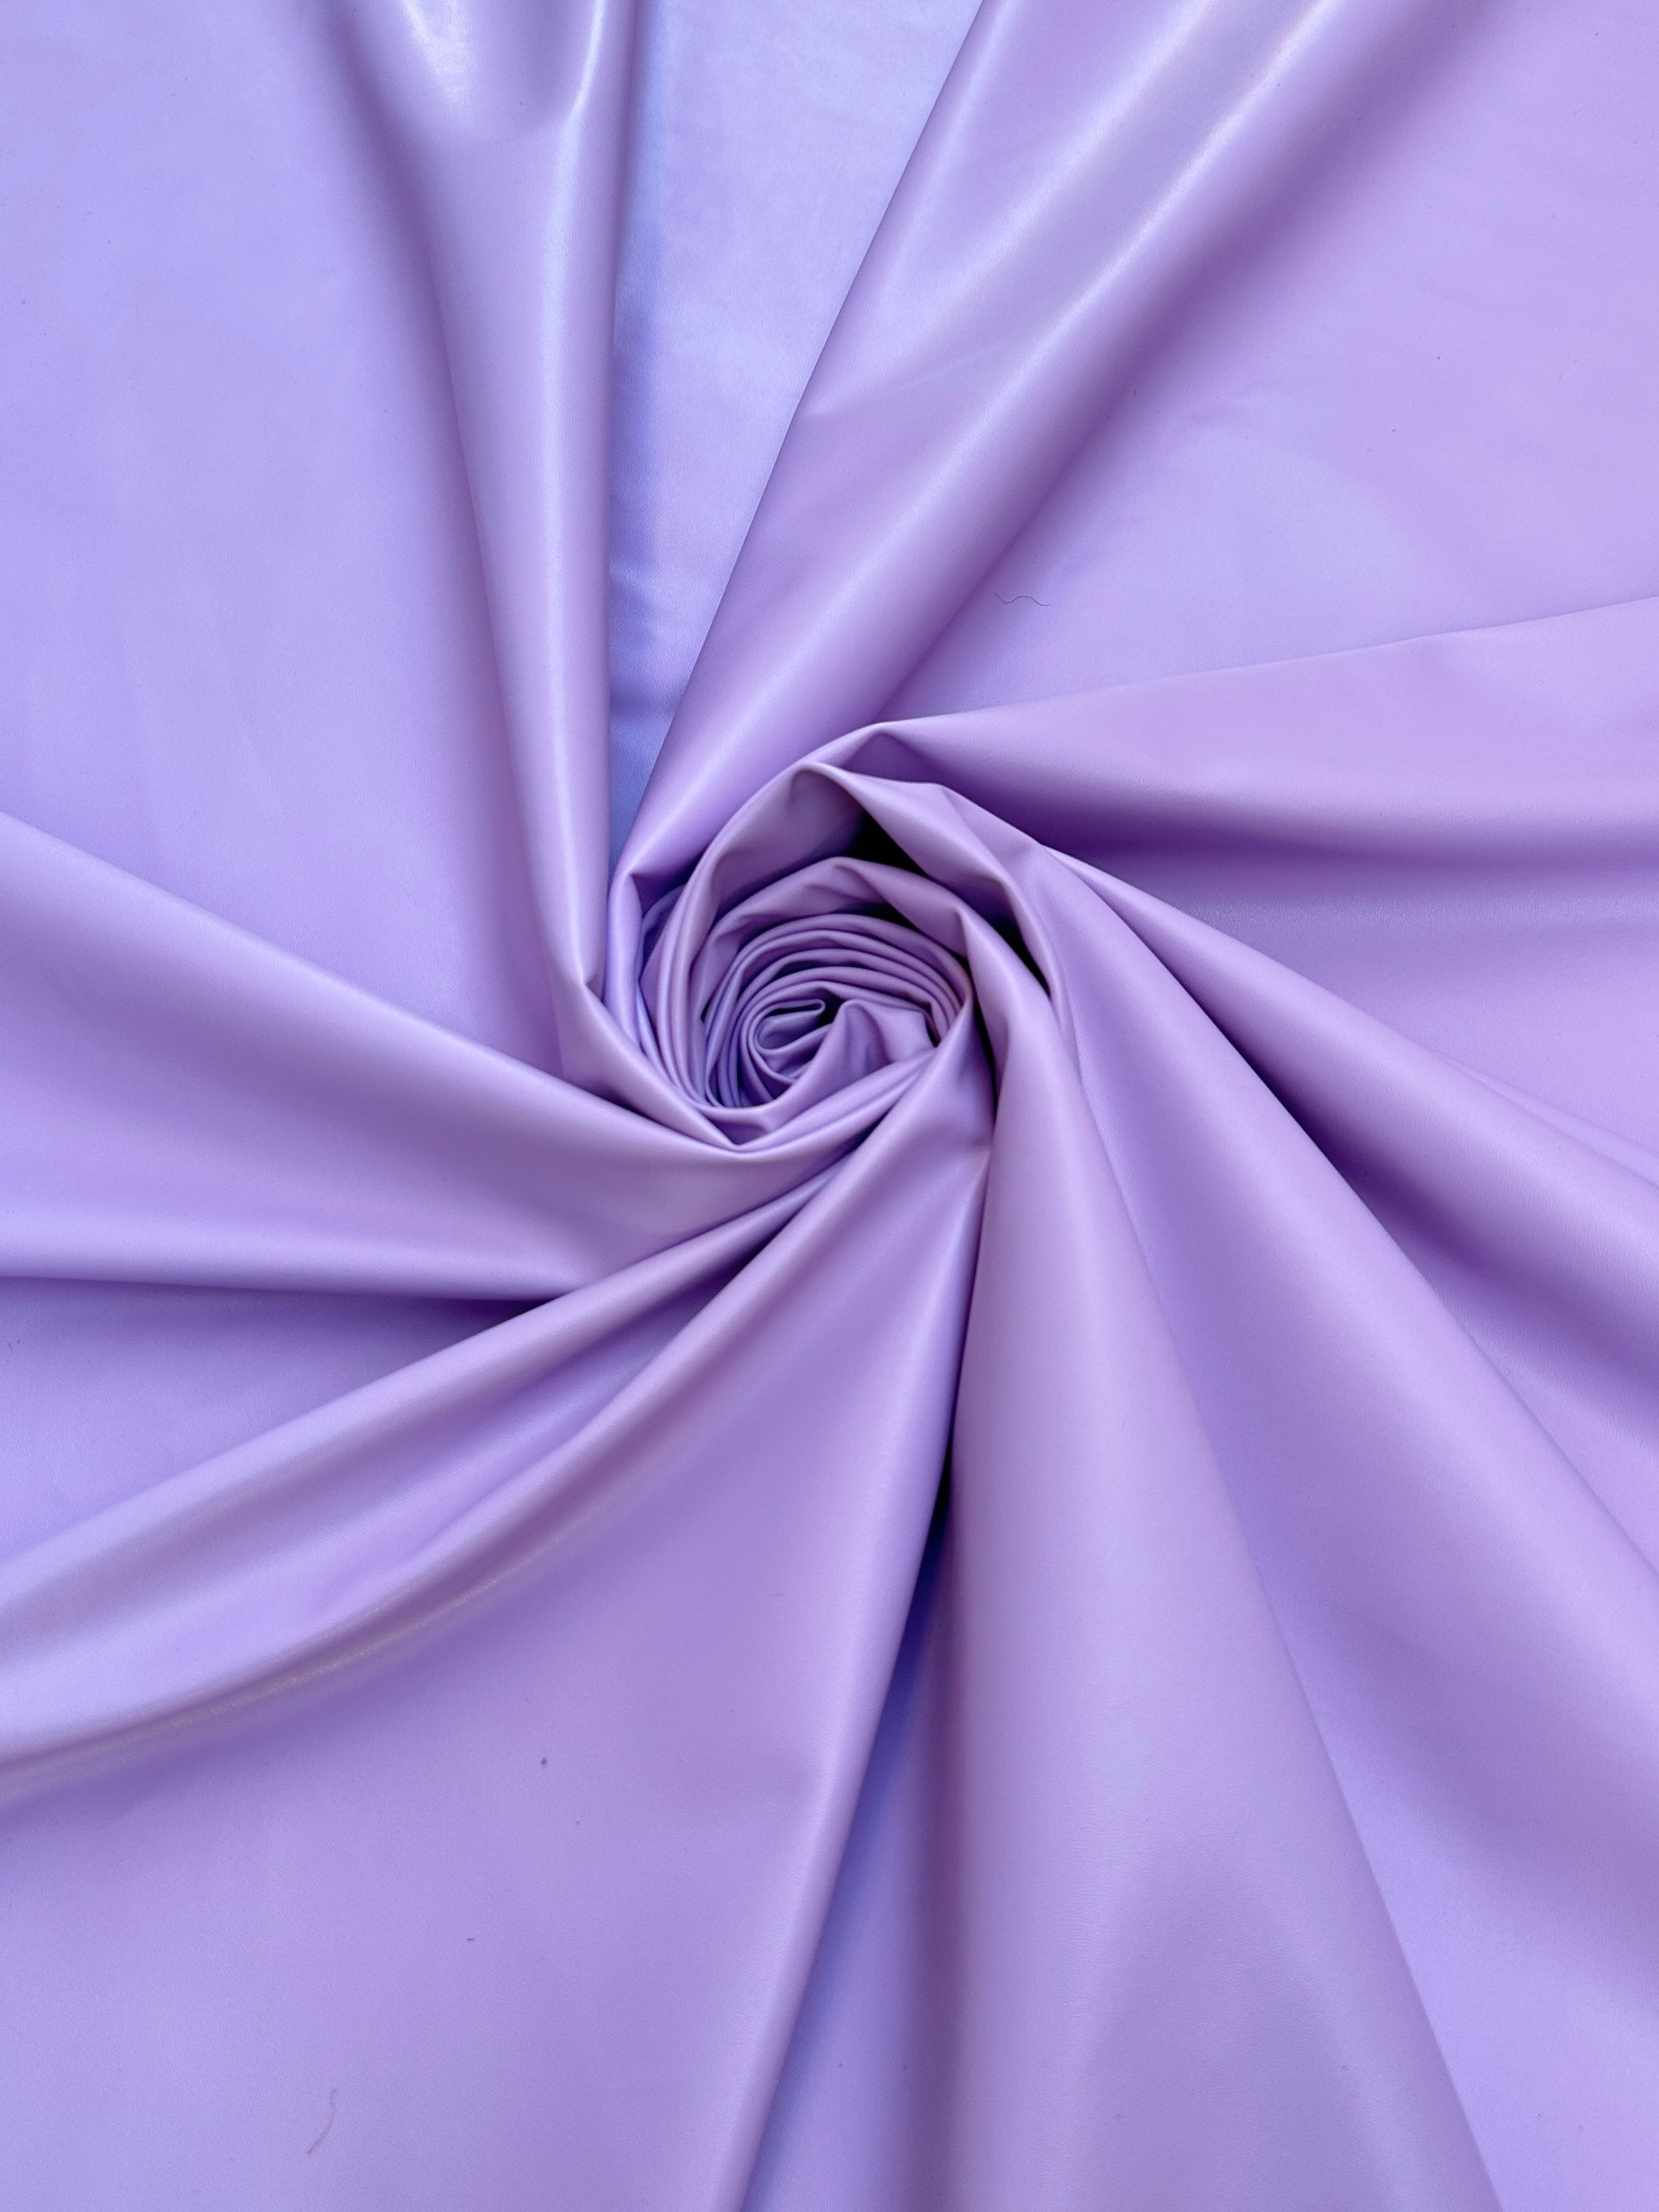 lavender stretch faux leather, stretch faux leather on sale, stretch faux leather on discount, stretch faux leather for woman,stretch faux leather for brazzer, purple stretch faux leather, light purple stretch faux leather, stretch faux leather for winter, stretch faux leather on demand, premium quality stretch faux leather